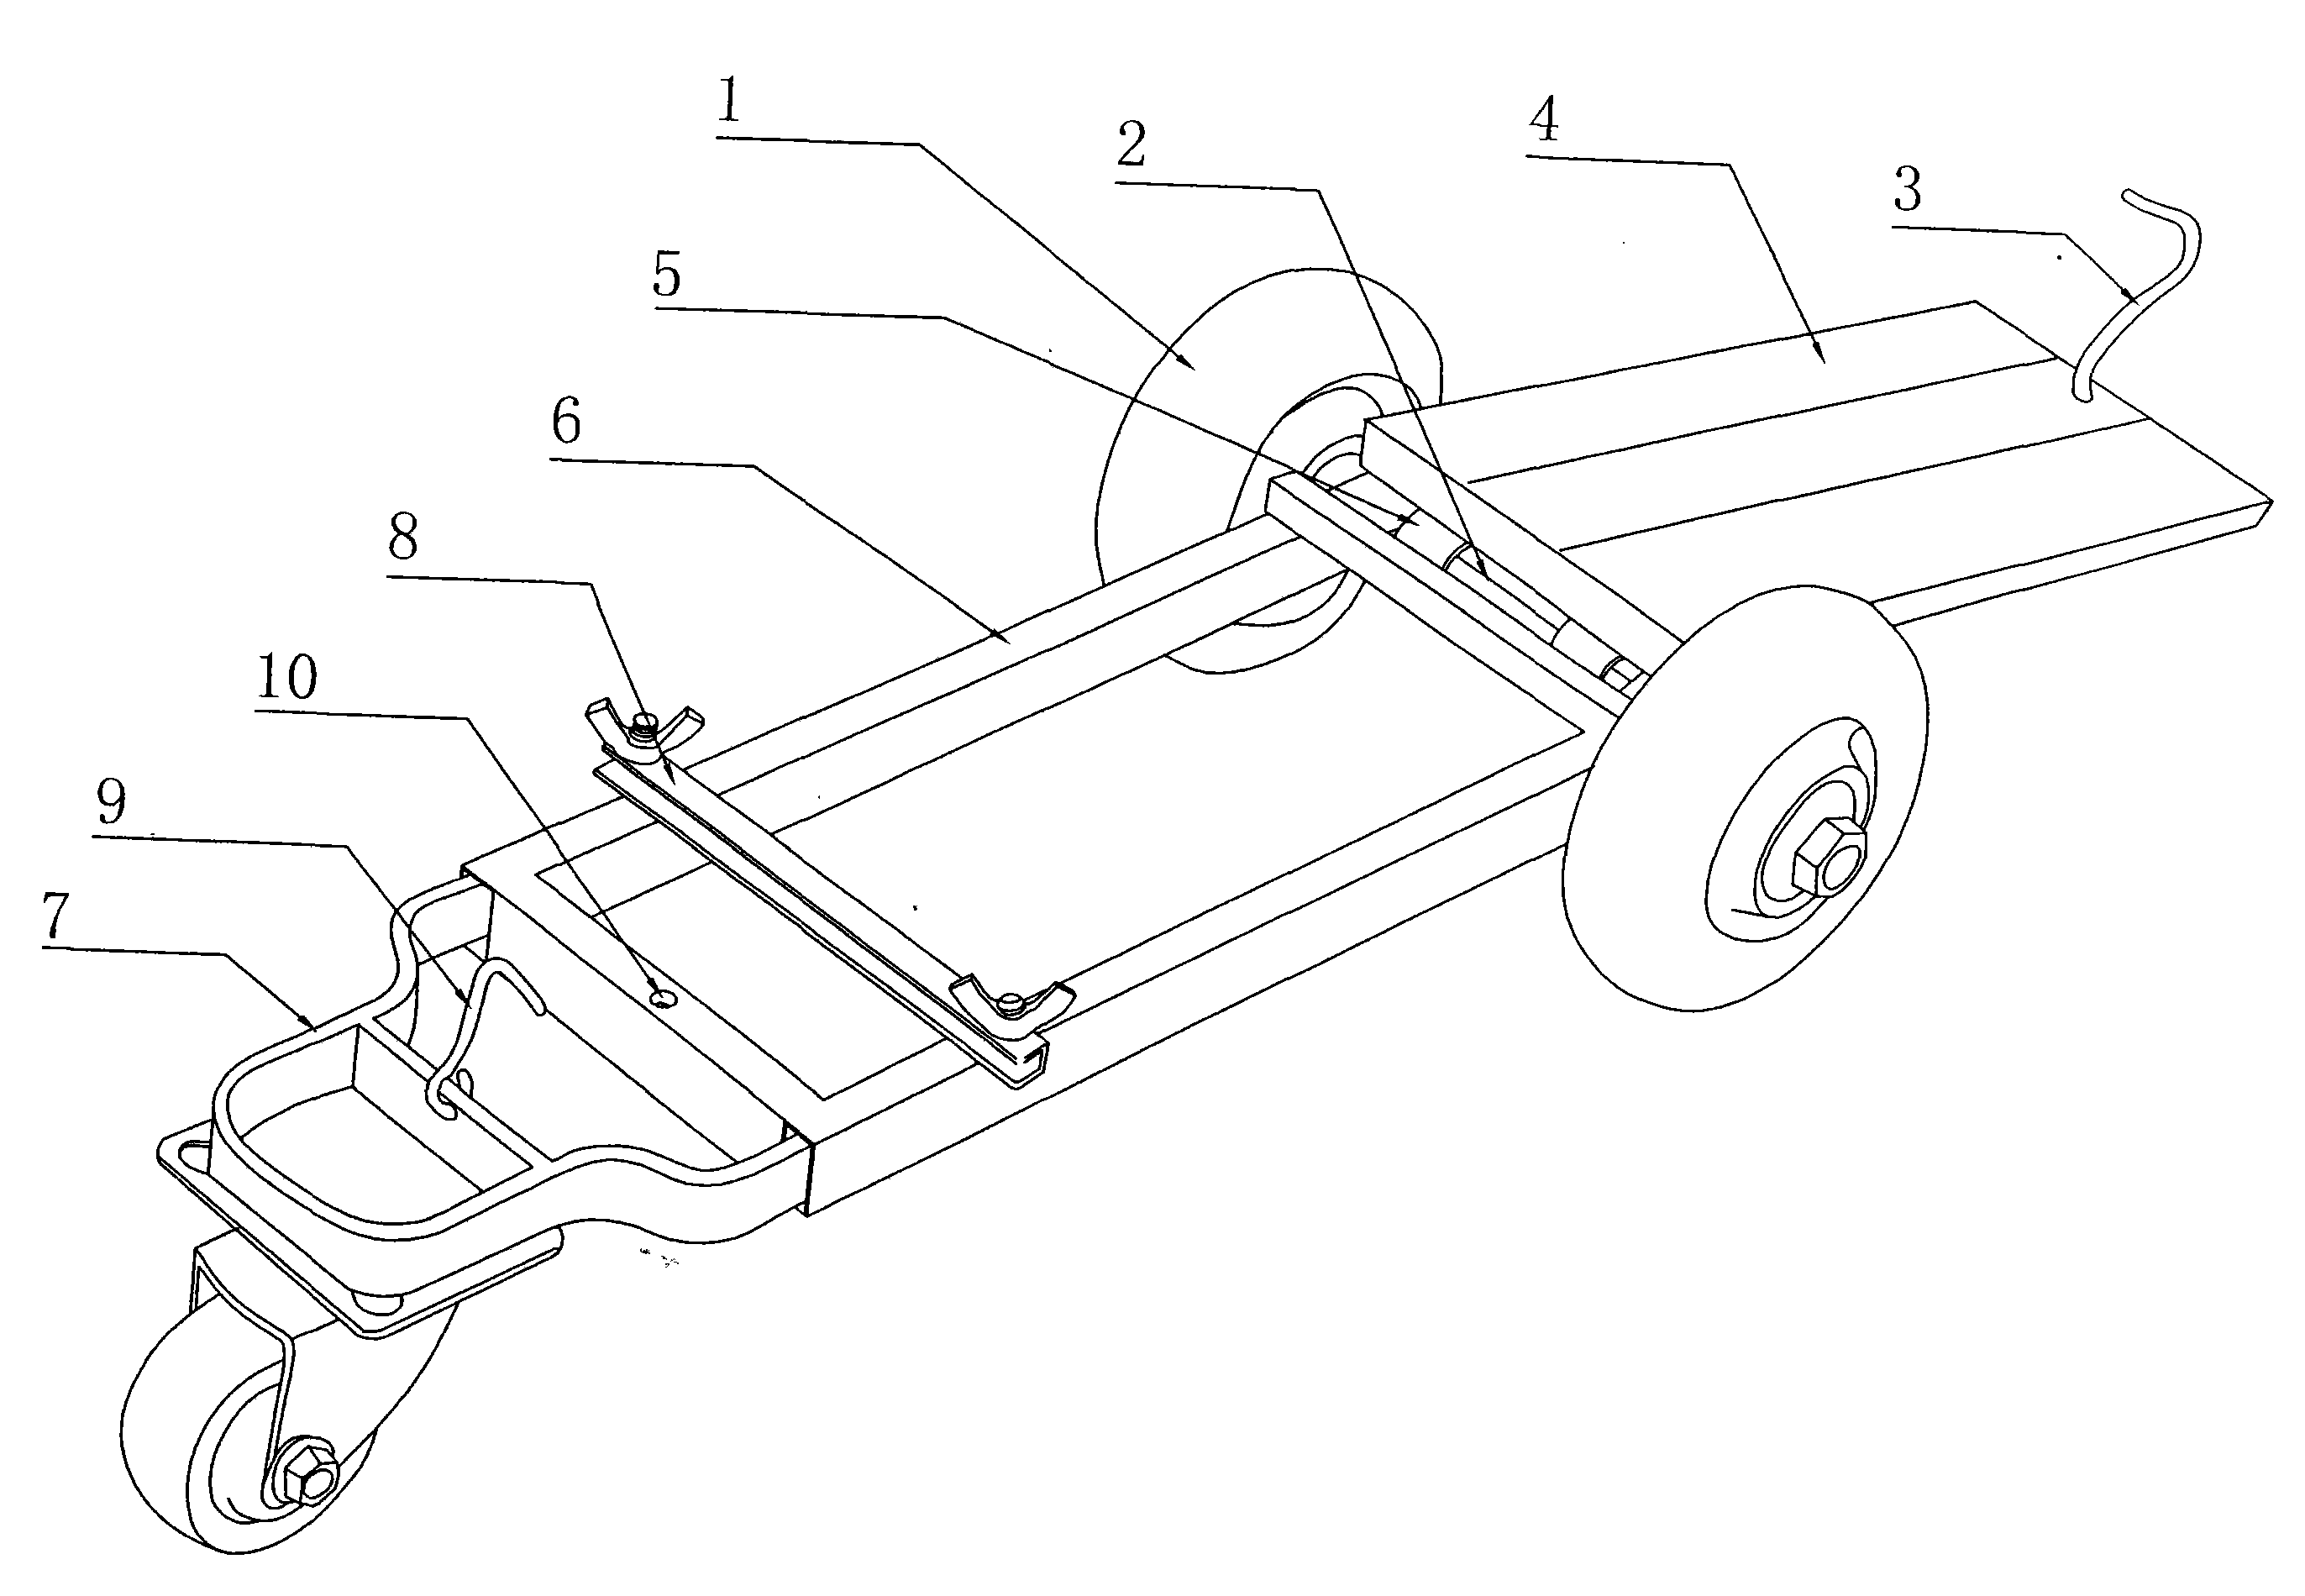 Labor-saving device for pushing and pulling two-wheeled vehicle with flat tires